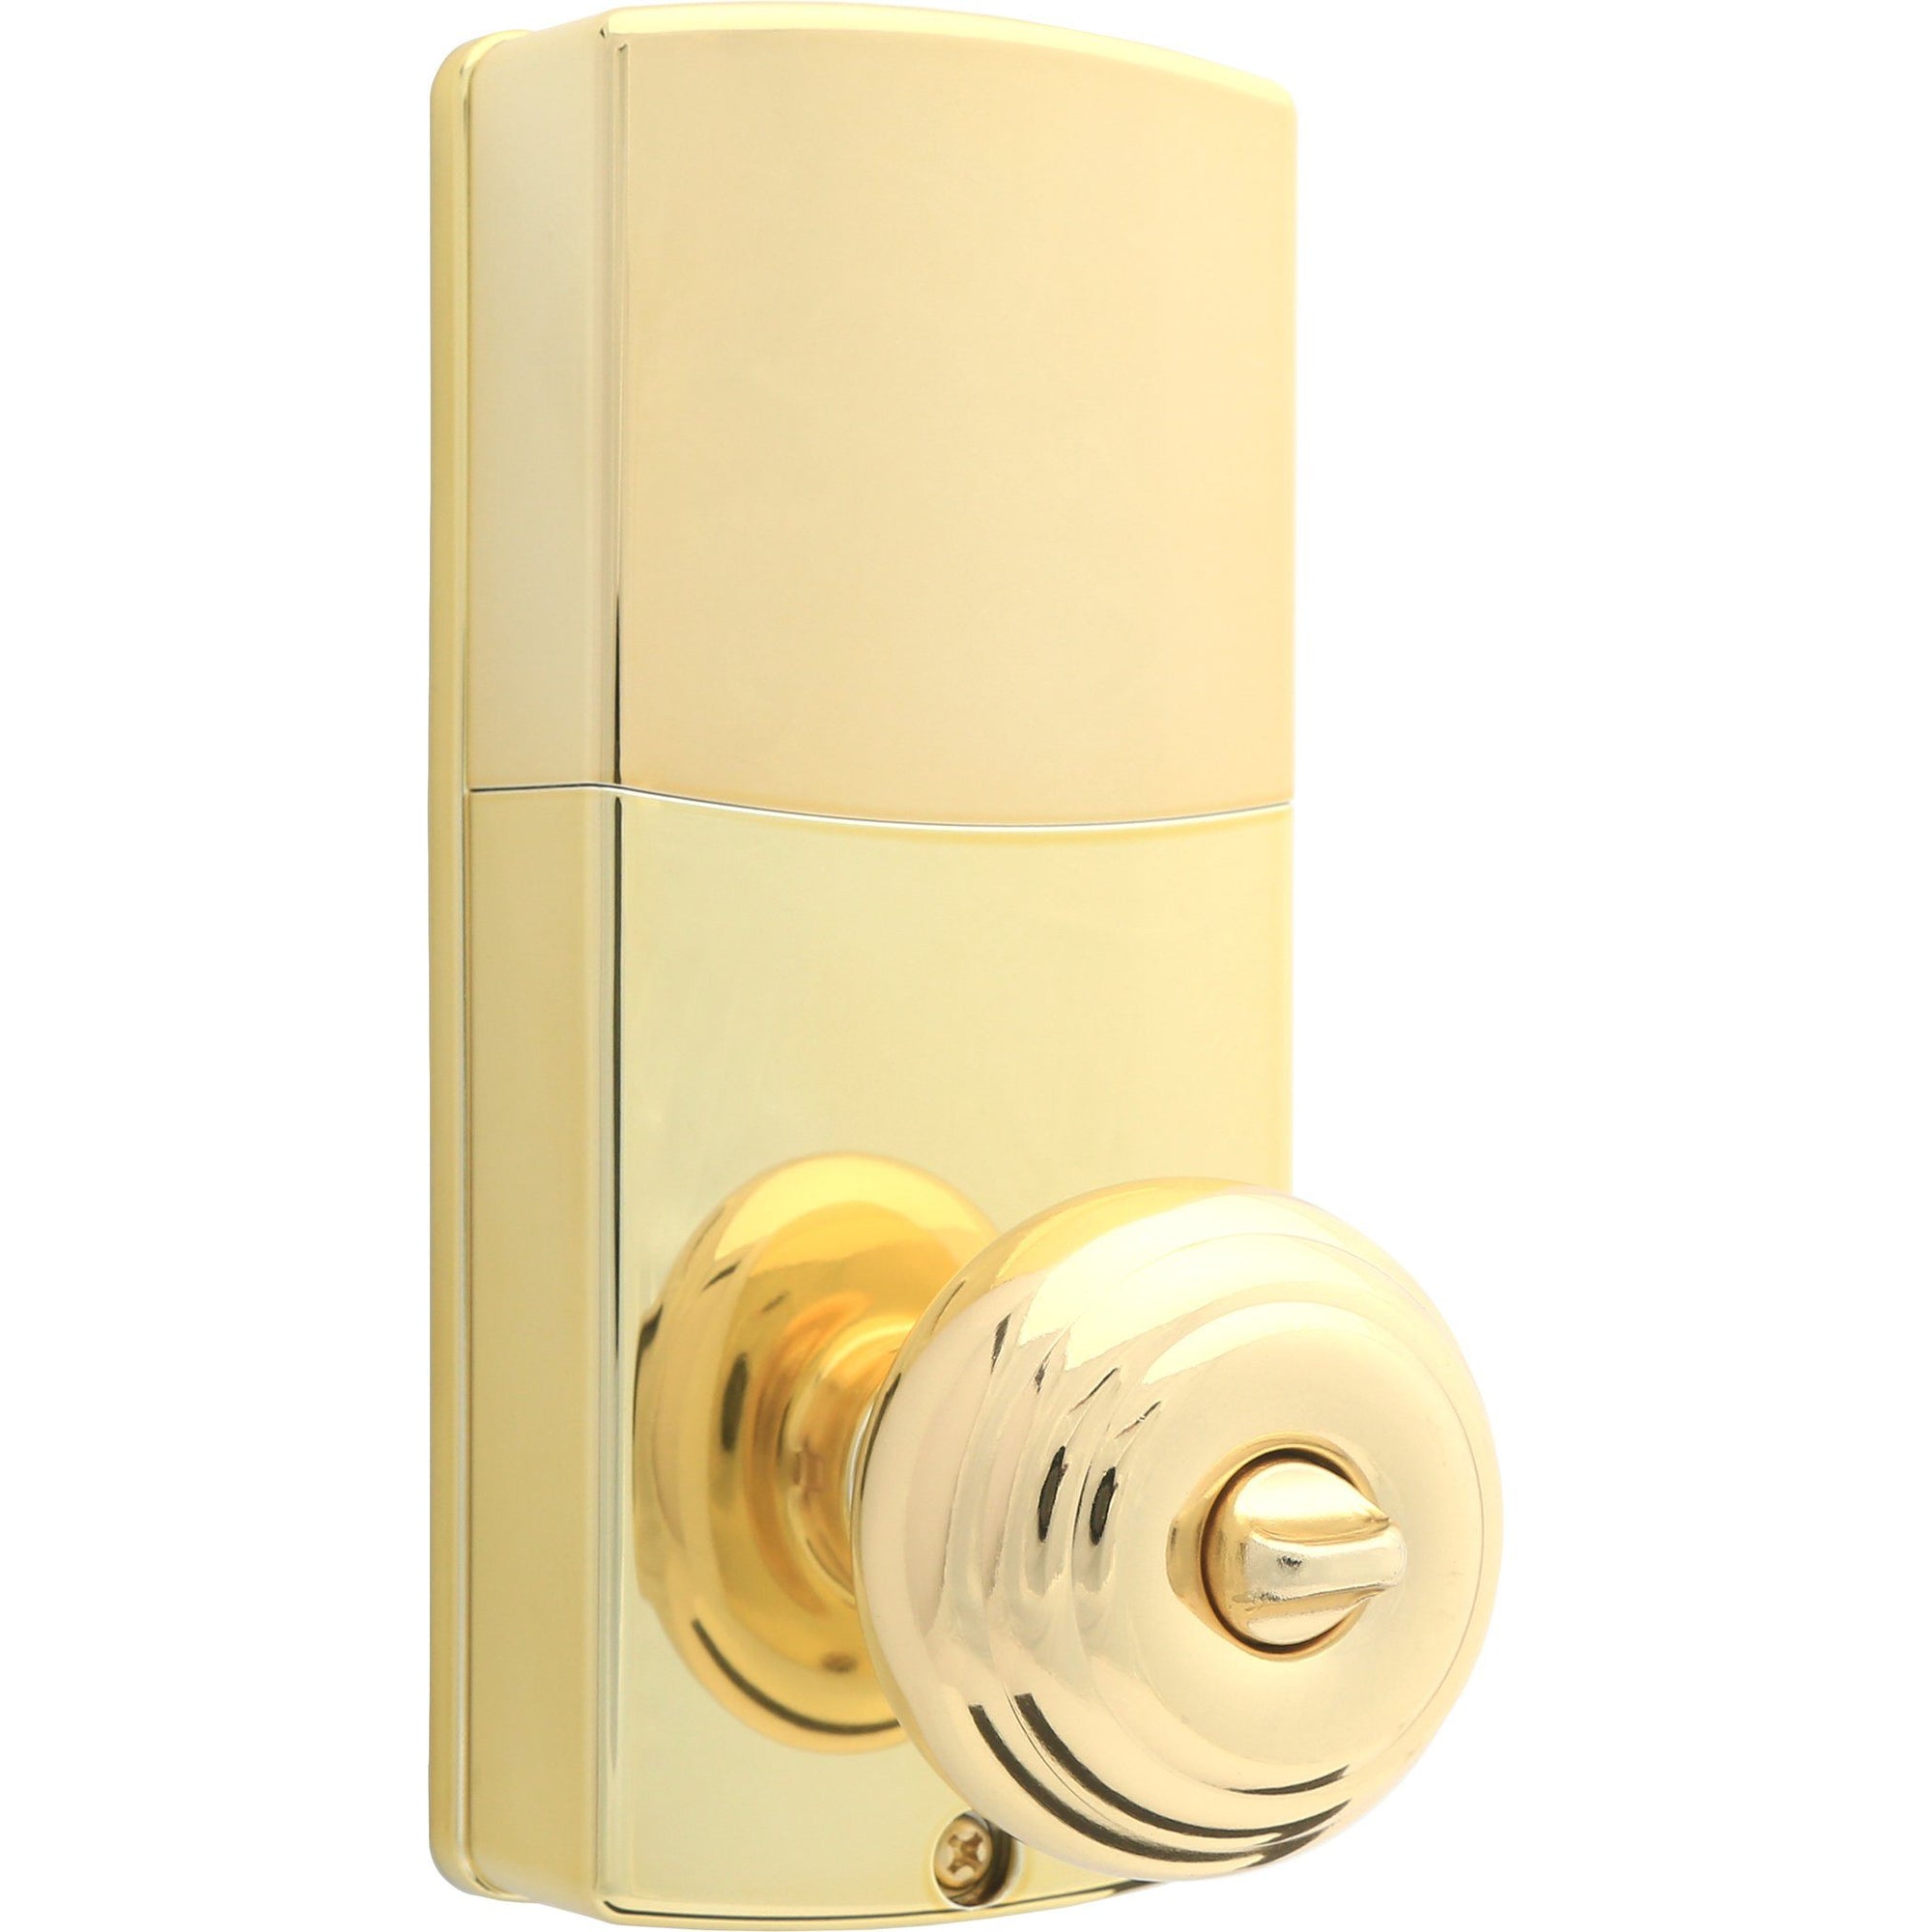 Honeywell 8732001 Electronic Entry Knob Door Lock with Keypad in Polished Brass with Numbers